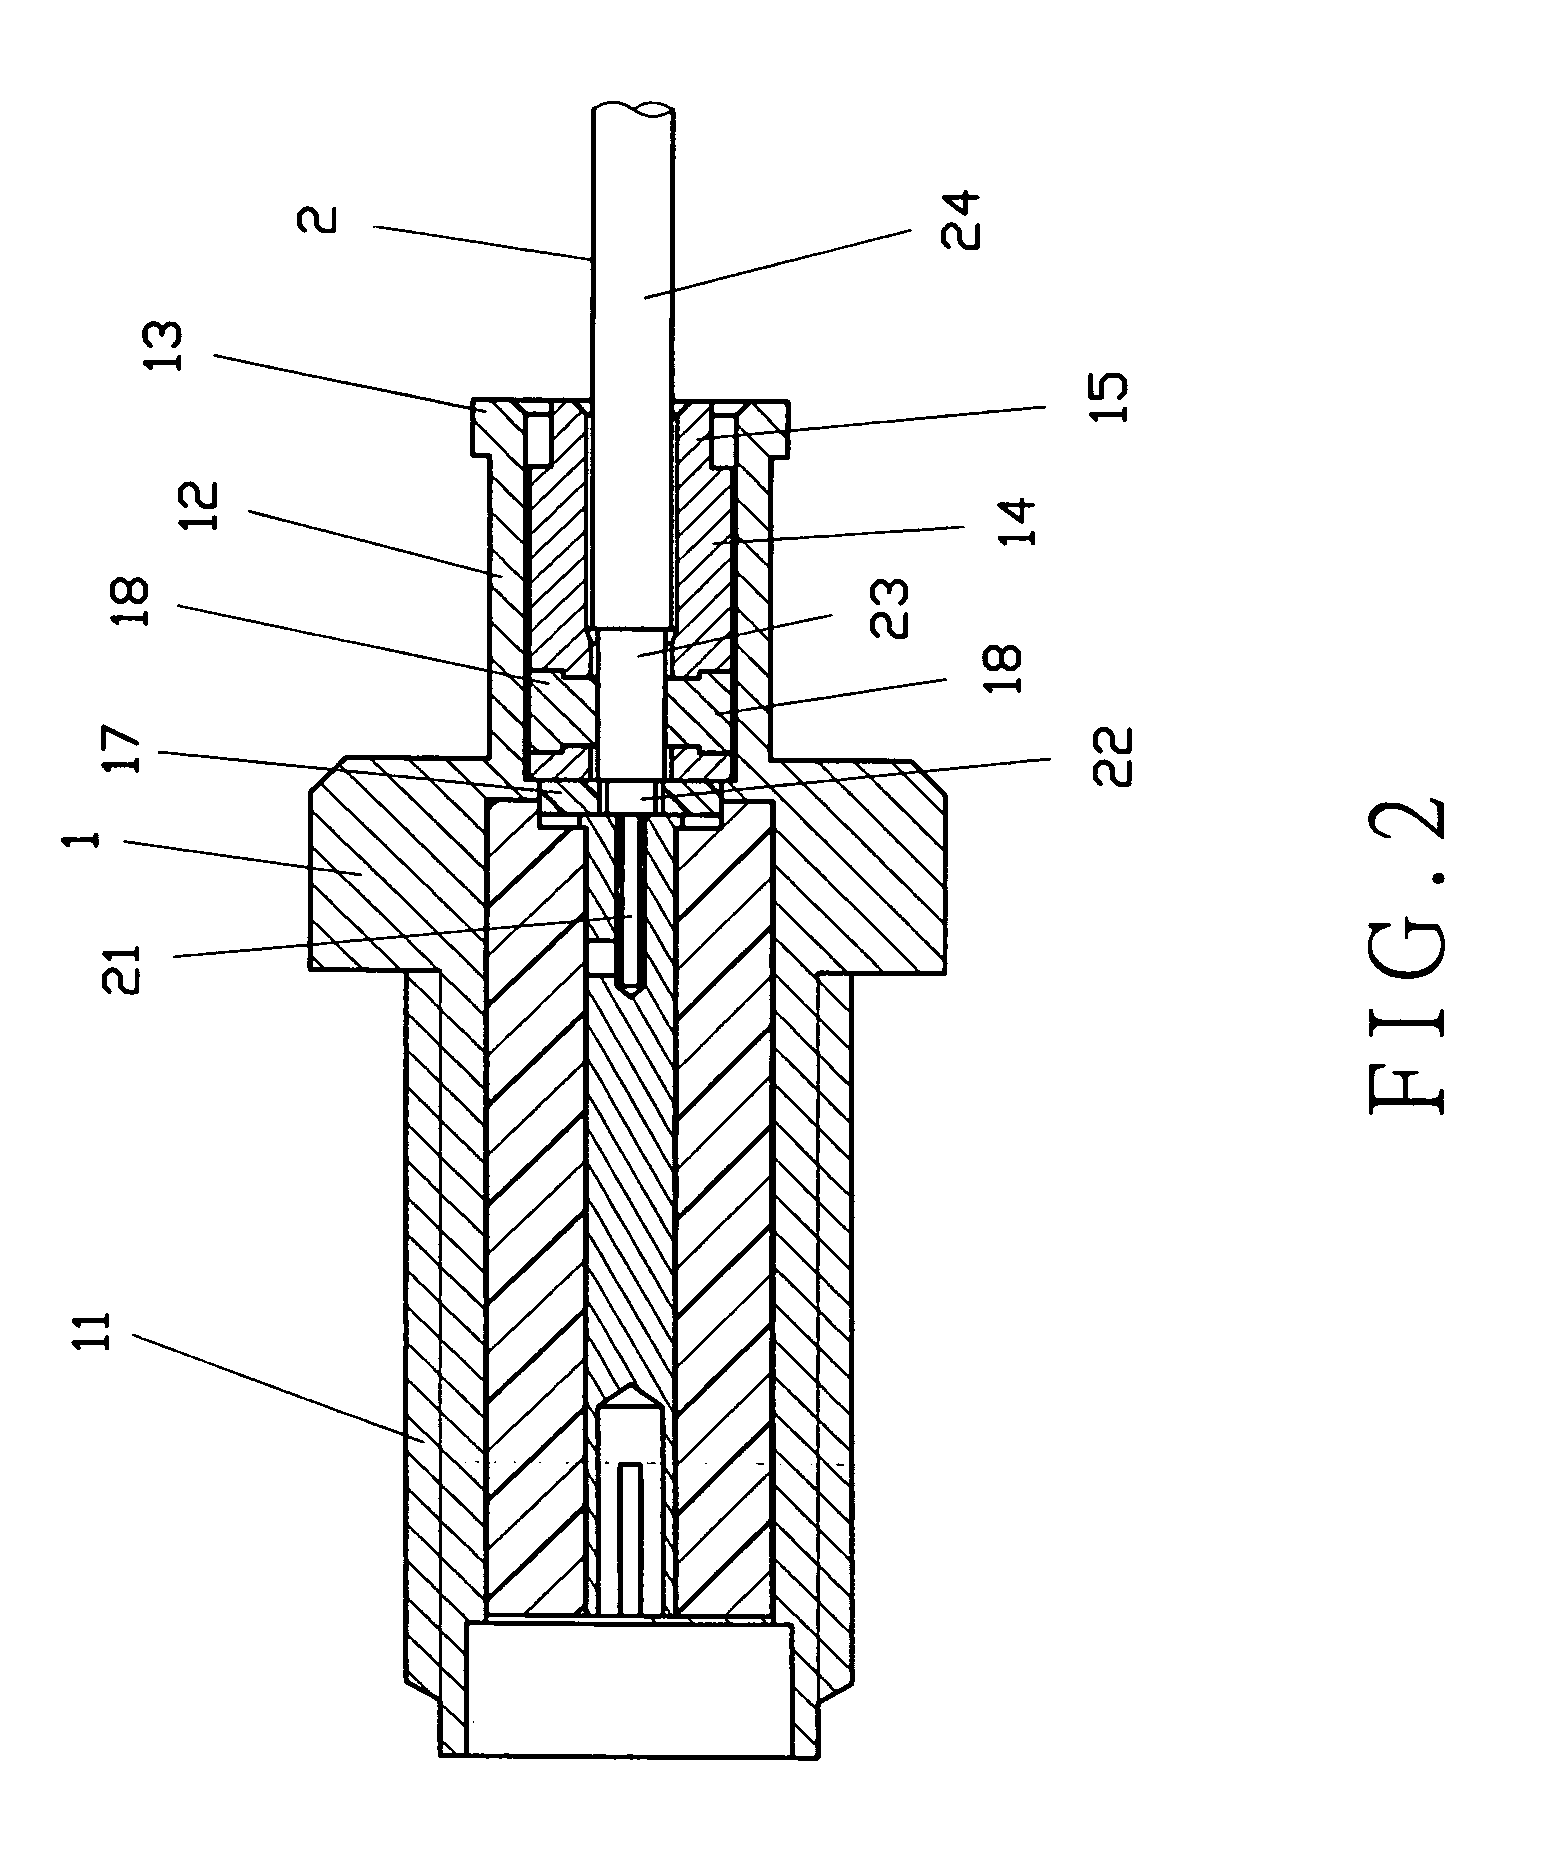 Coaxial connector structure